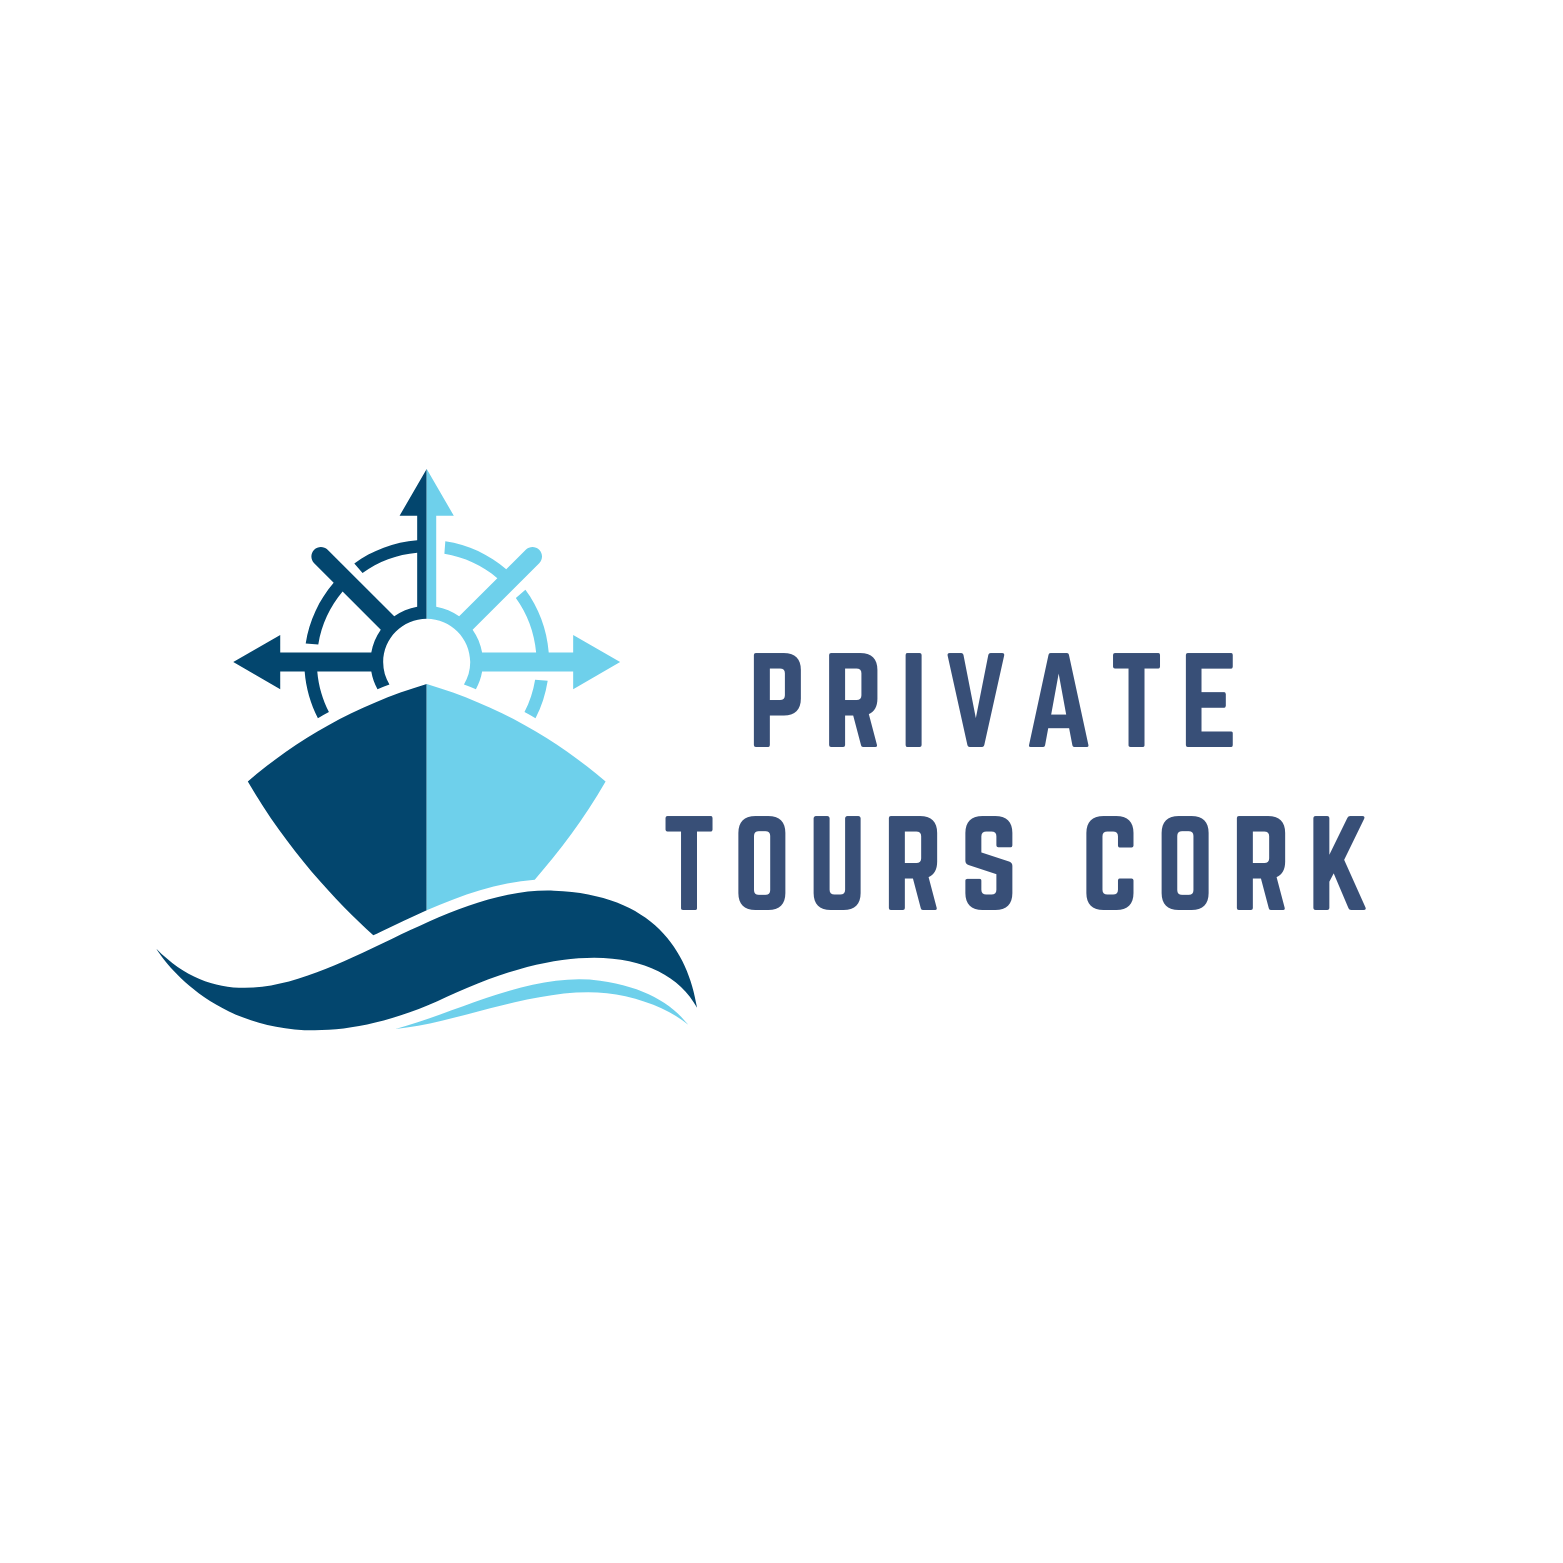 a logo for a company called private tours cork